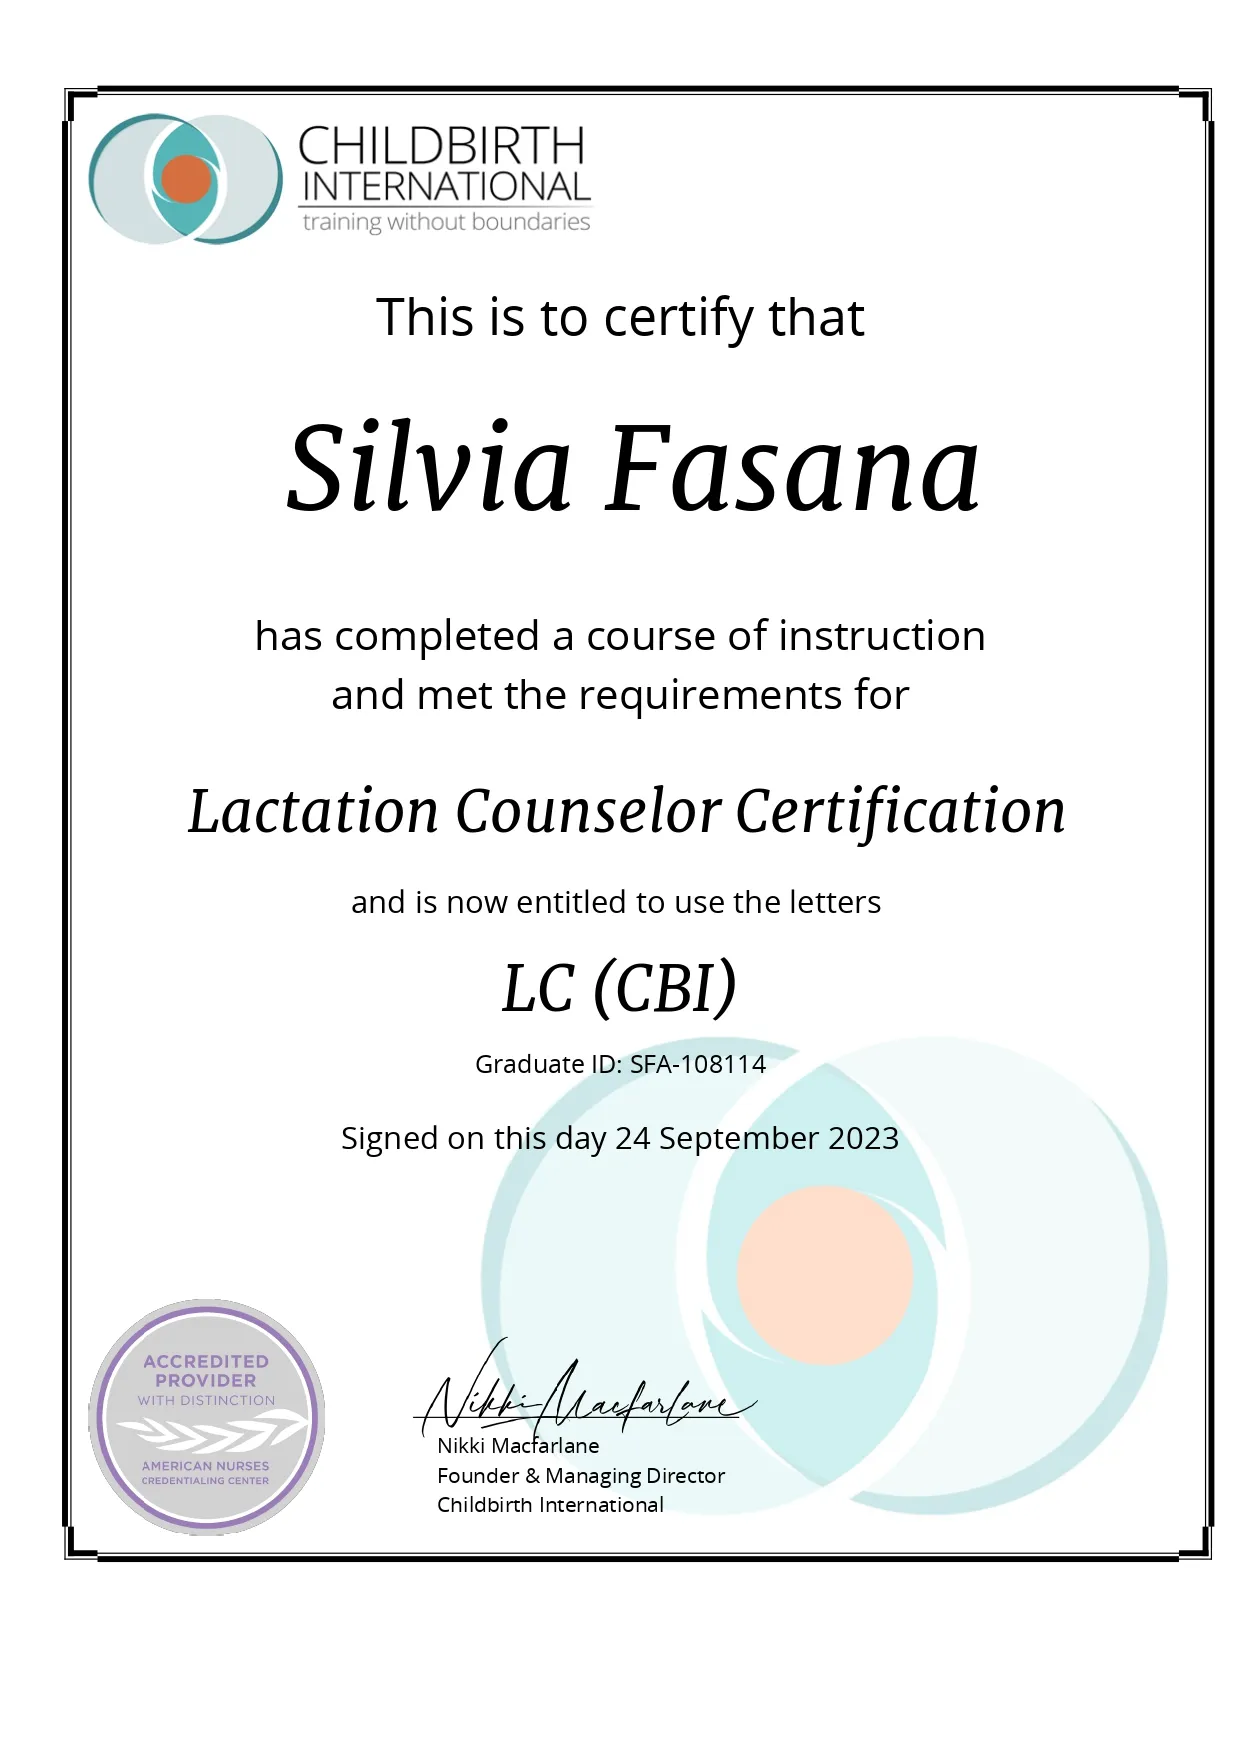 Silvia's certification on lactation counsellor services.